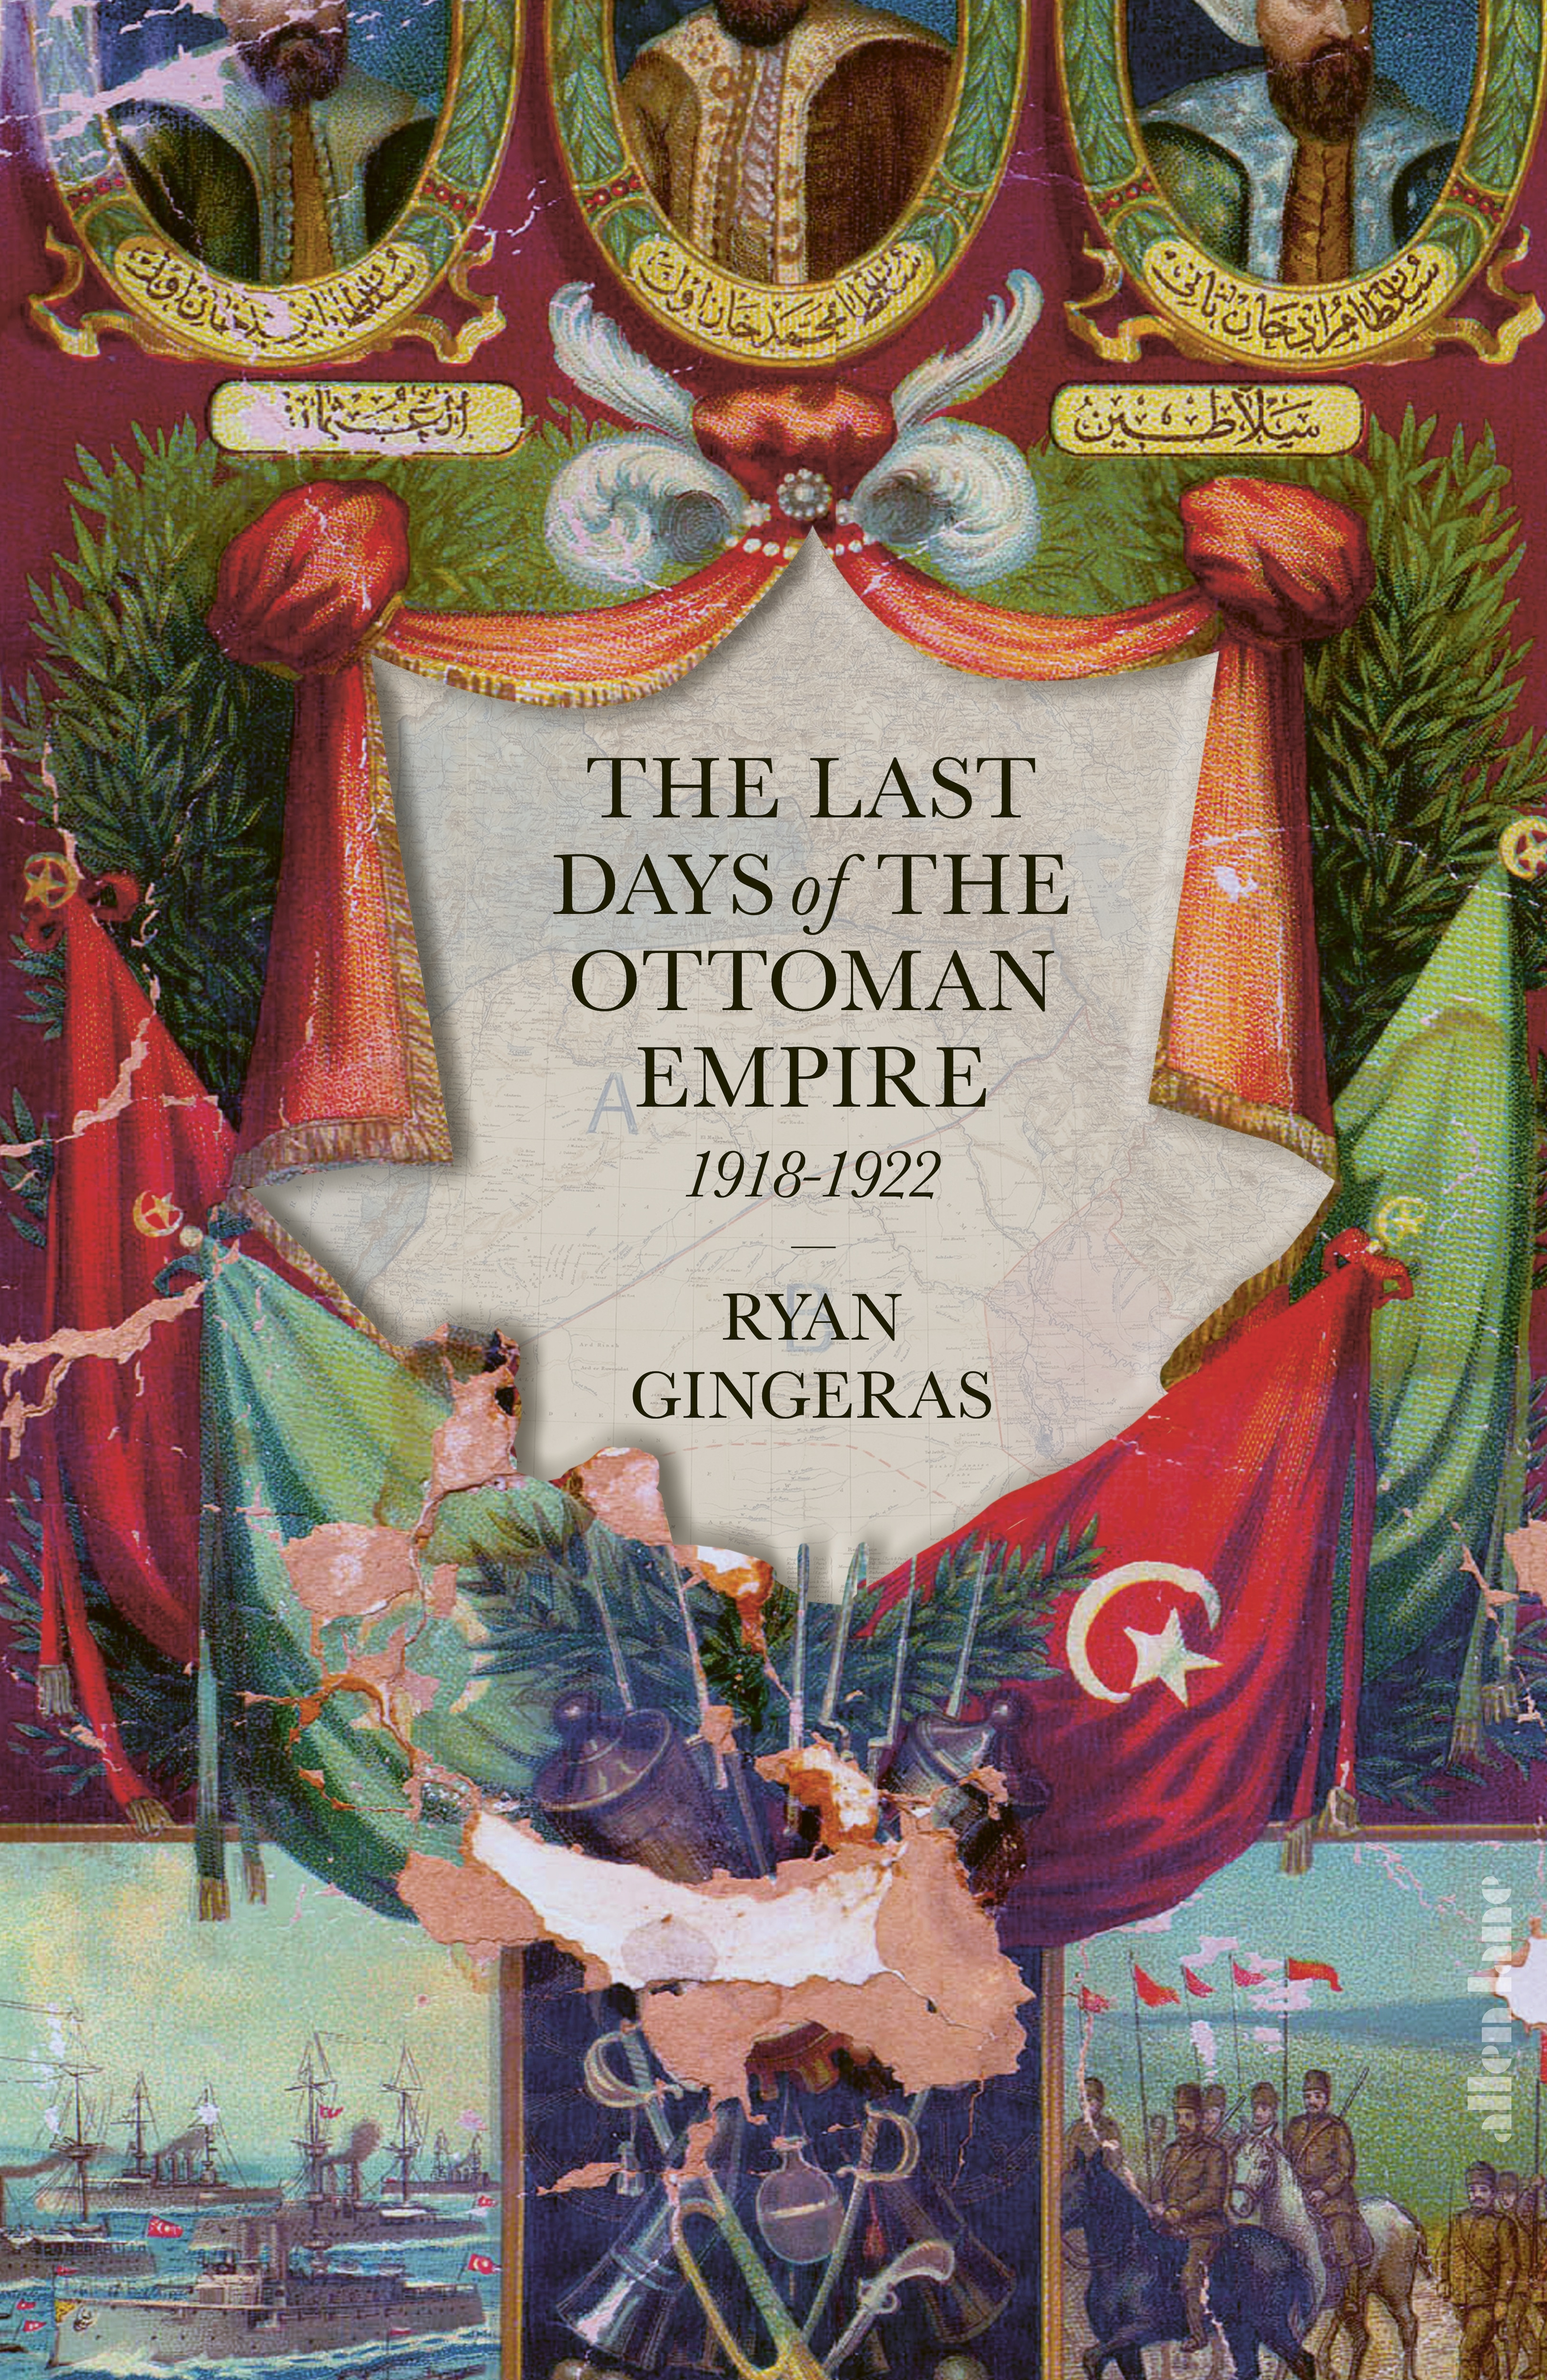 Book “The Last Days of the Ottoman Empire, 1918-1922” by Ryan Gingeras — October 27, 2022